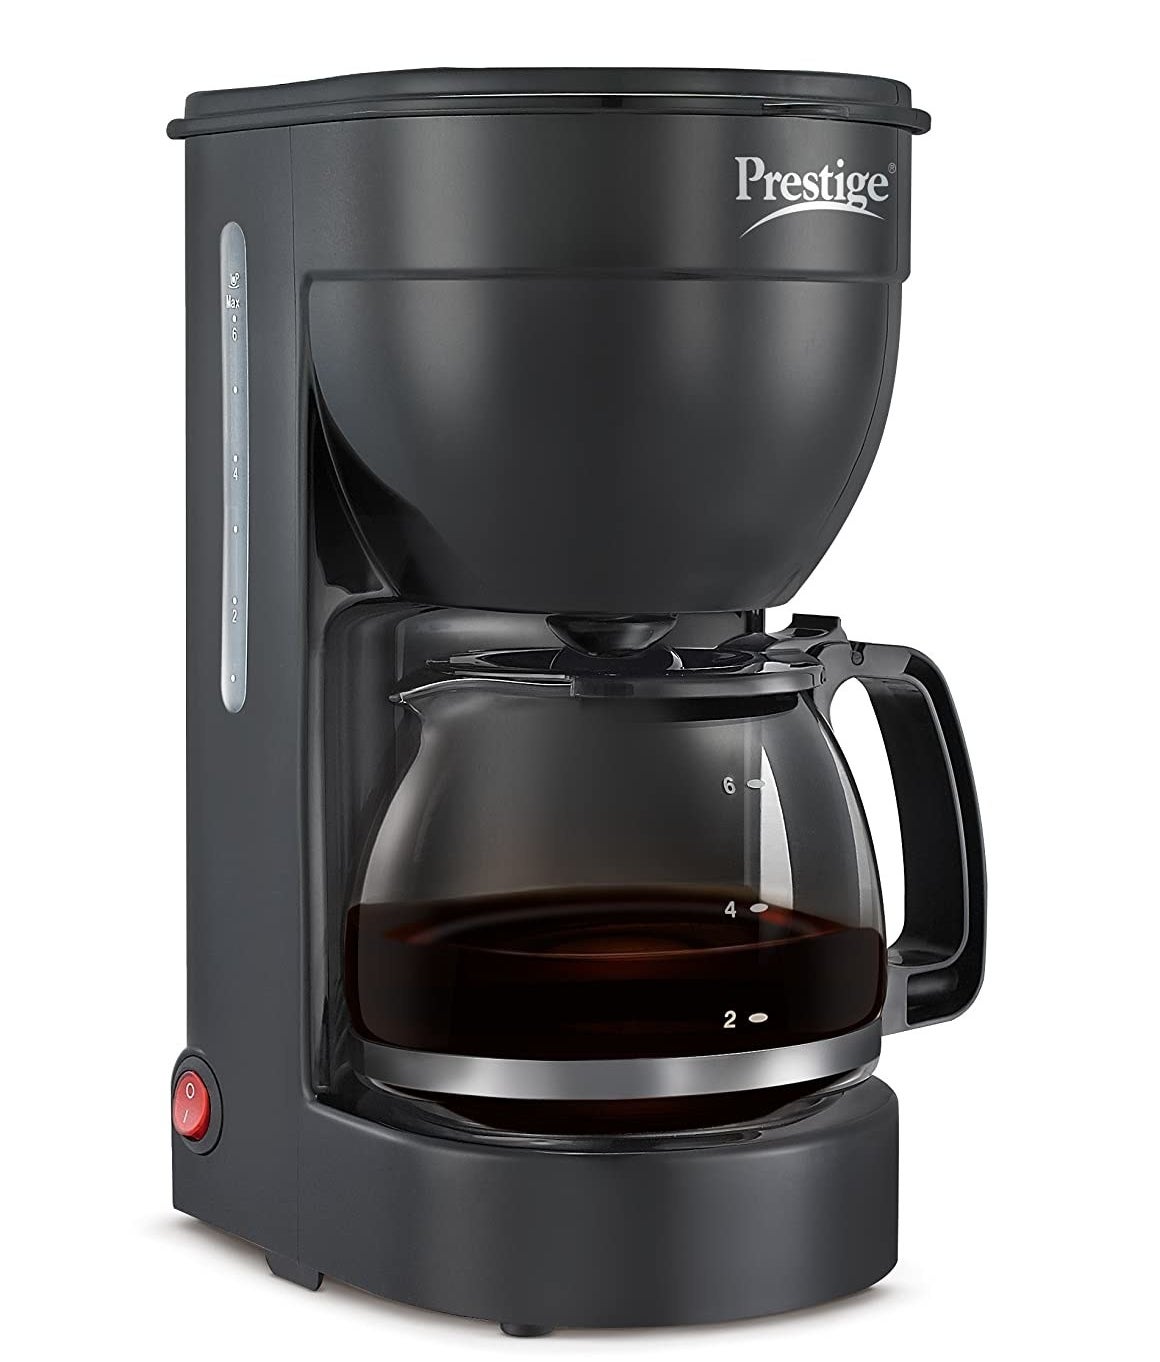 18 Of The Best Coffee Makers On Amazon For Every Budget